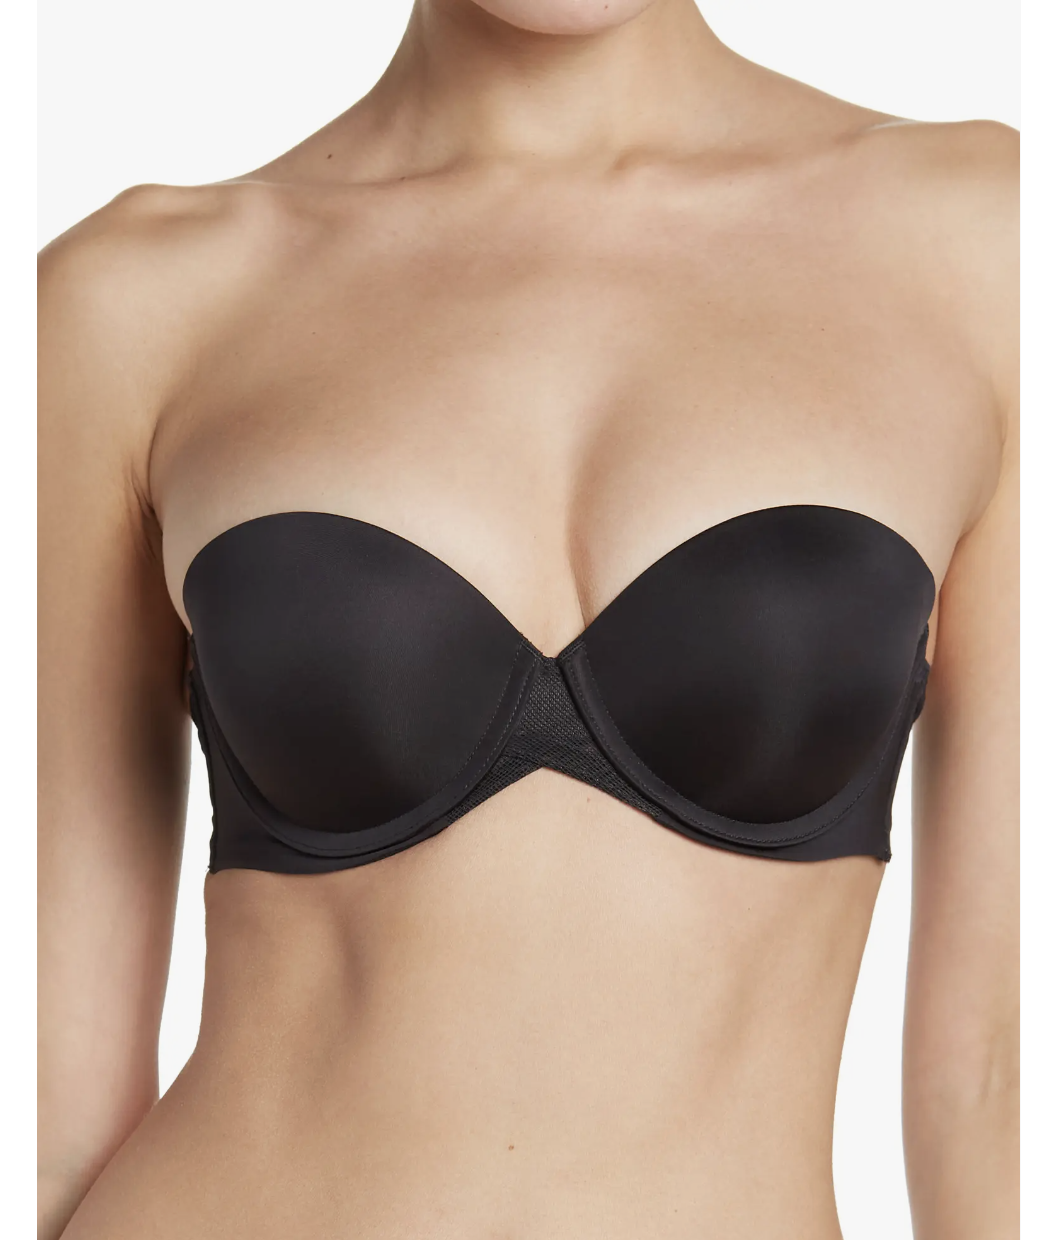 7 Seriously Comfy Strapless Bras on Sale Now — Up to 52% Off!